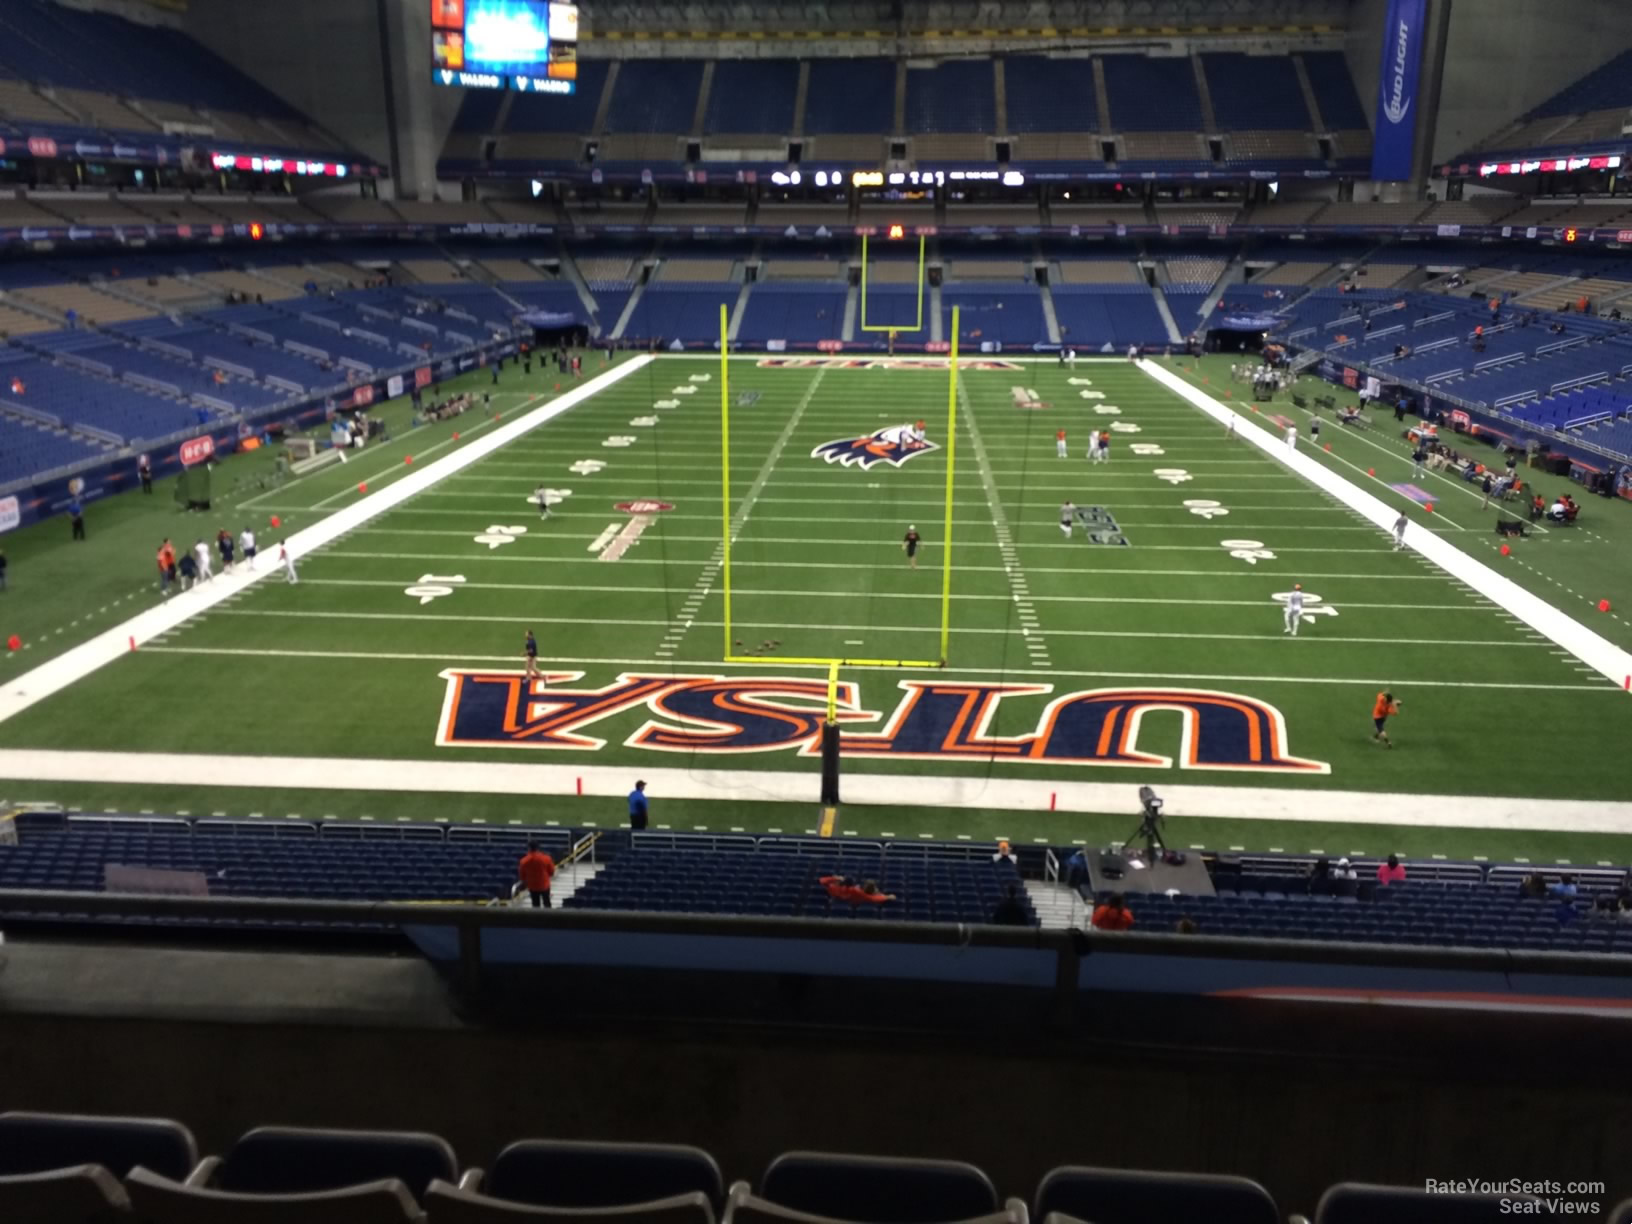 section 223, row 5 seat view  for football - alamodome